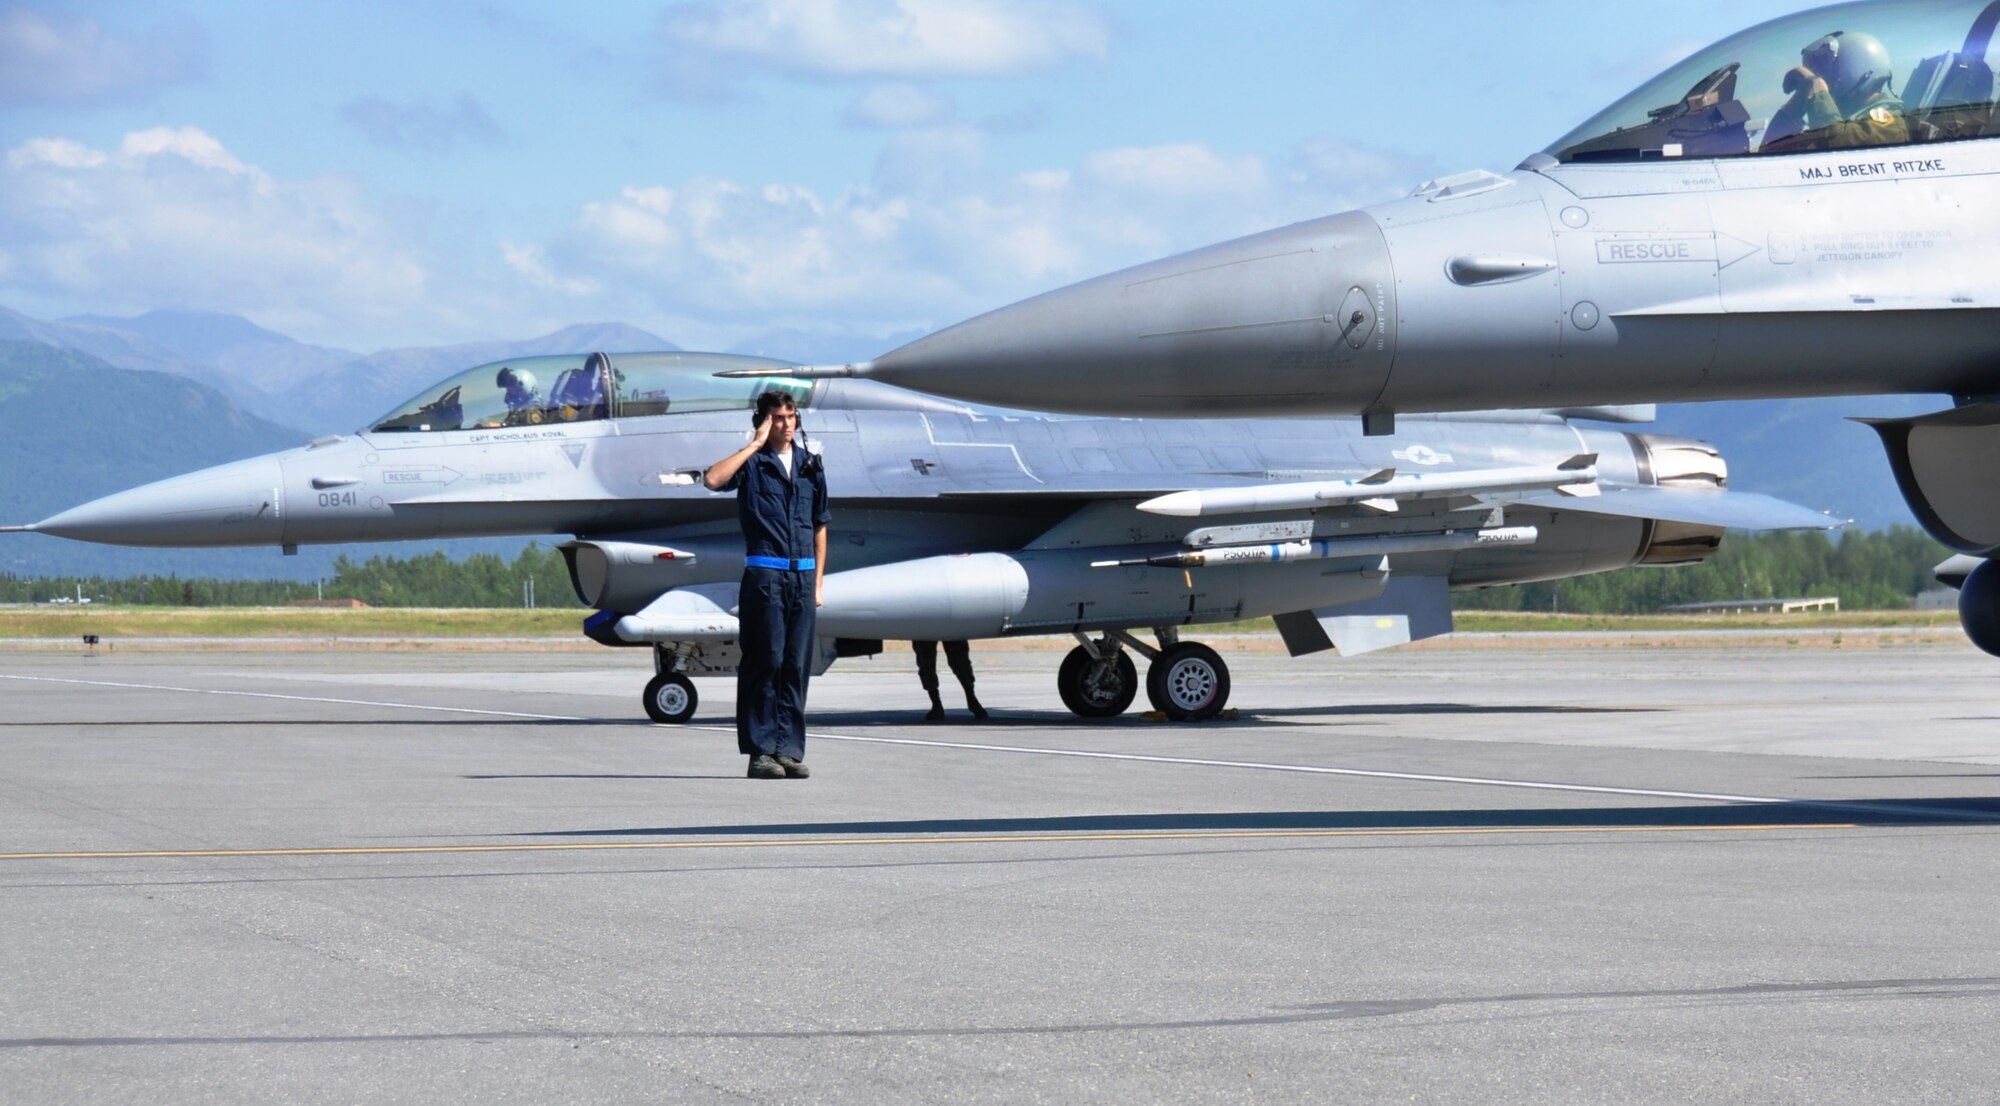 Senior Airman Jeremy Fogle, 96th Aircraft Maintenance Squadron F-16 crew chief from Nazareth, Pa., salutes Maj Grizz Baer, 53rd Wing F-16 pilot from Wolcott, Ind., prior to takeoff for an Exercise Northern Edge mission June 23, 2015.  Northern Edge is Alaska’s premier joint training exercise designed to practice operations, techniques and procedures as well as enhance interoperability among the services. Thousands of service members from active duty, Reserve and National Guard units are involved.  (U.S. Air Force photo/Capt. Tania Bryan)